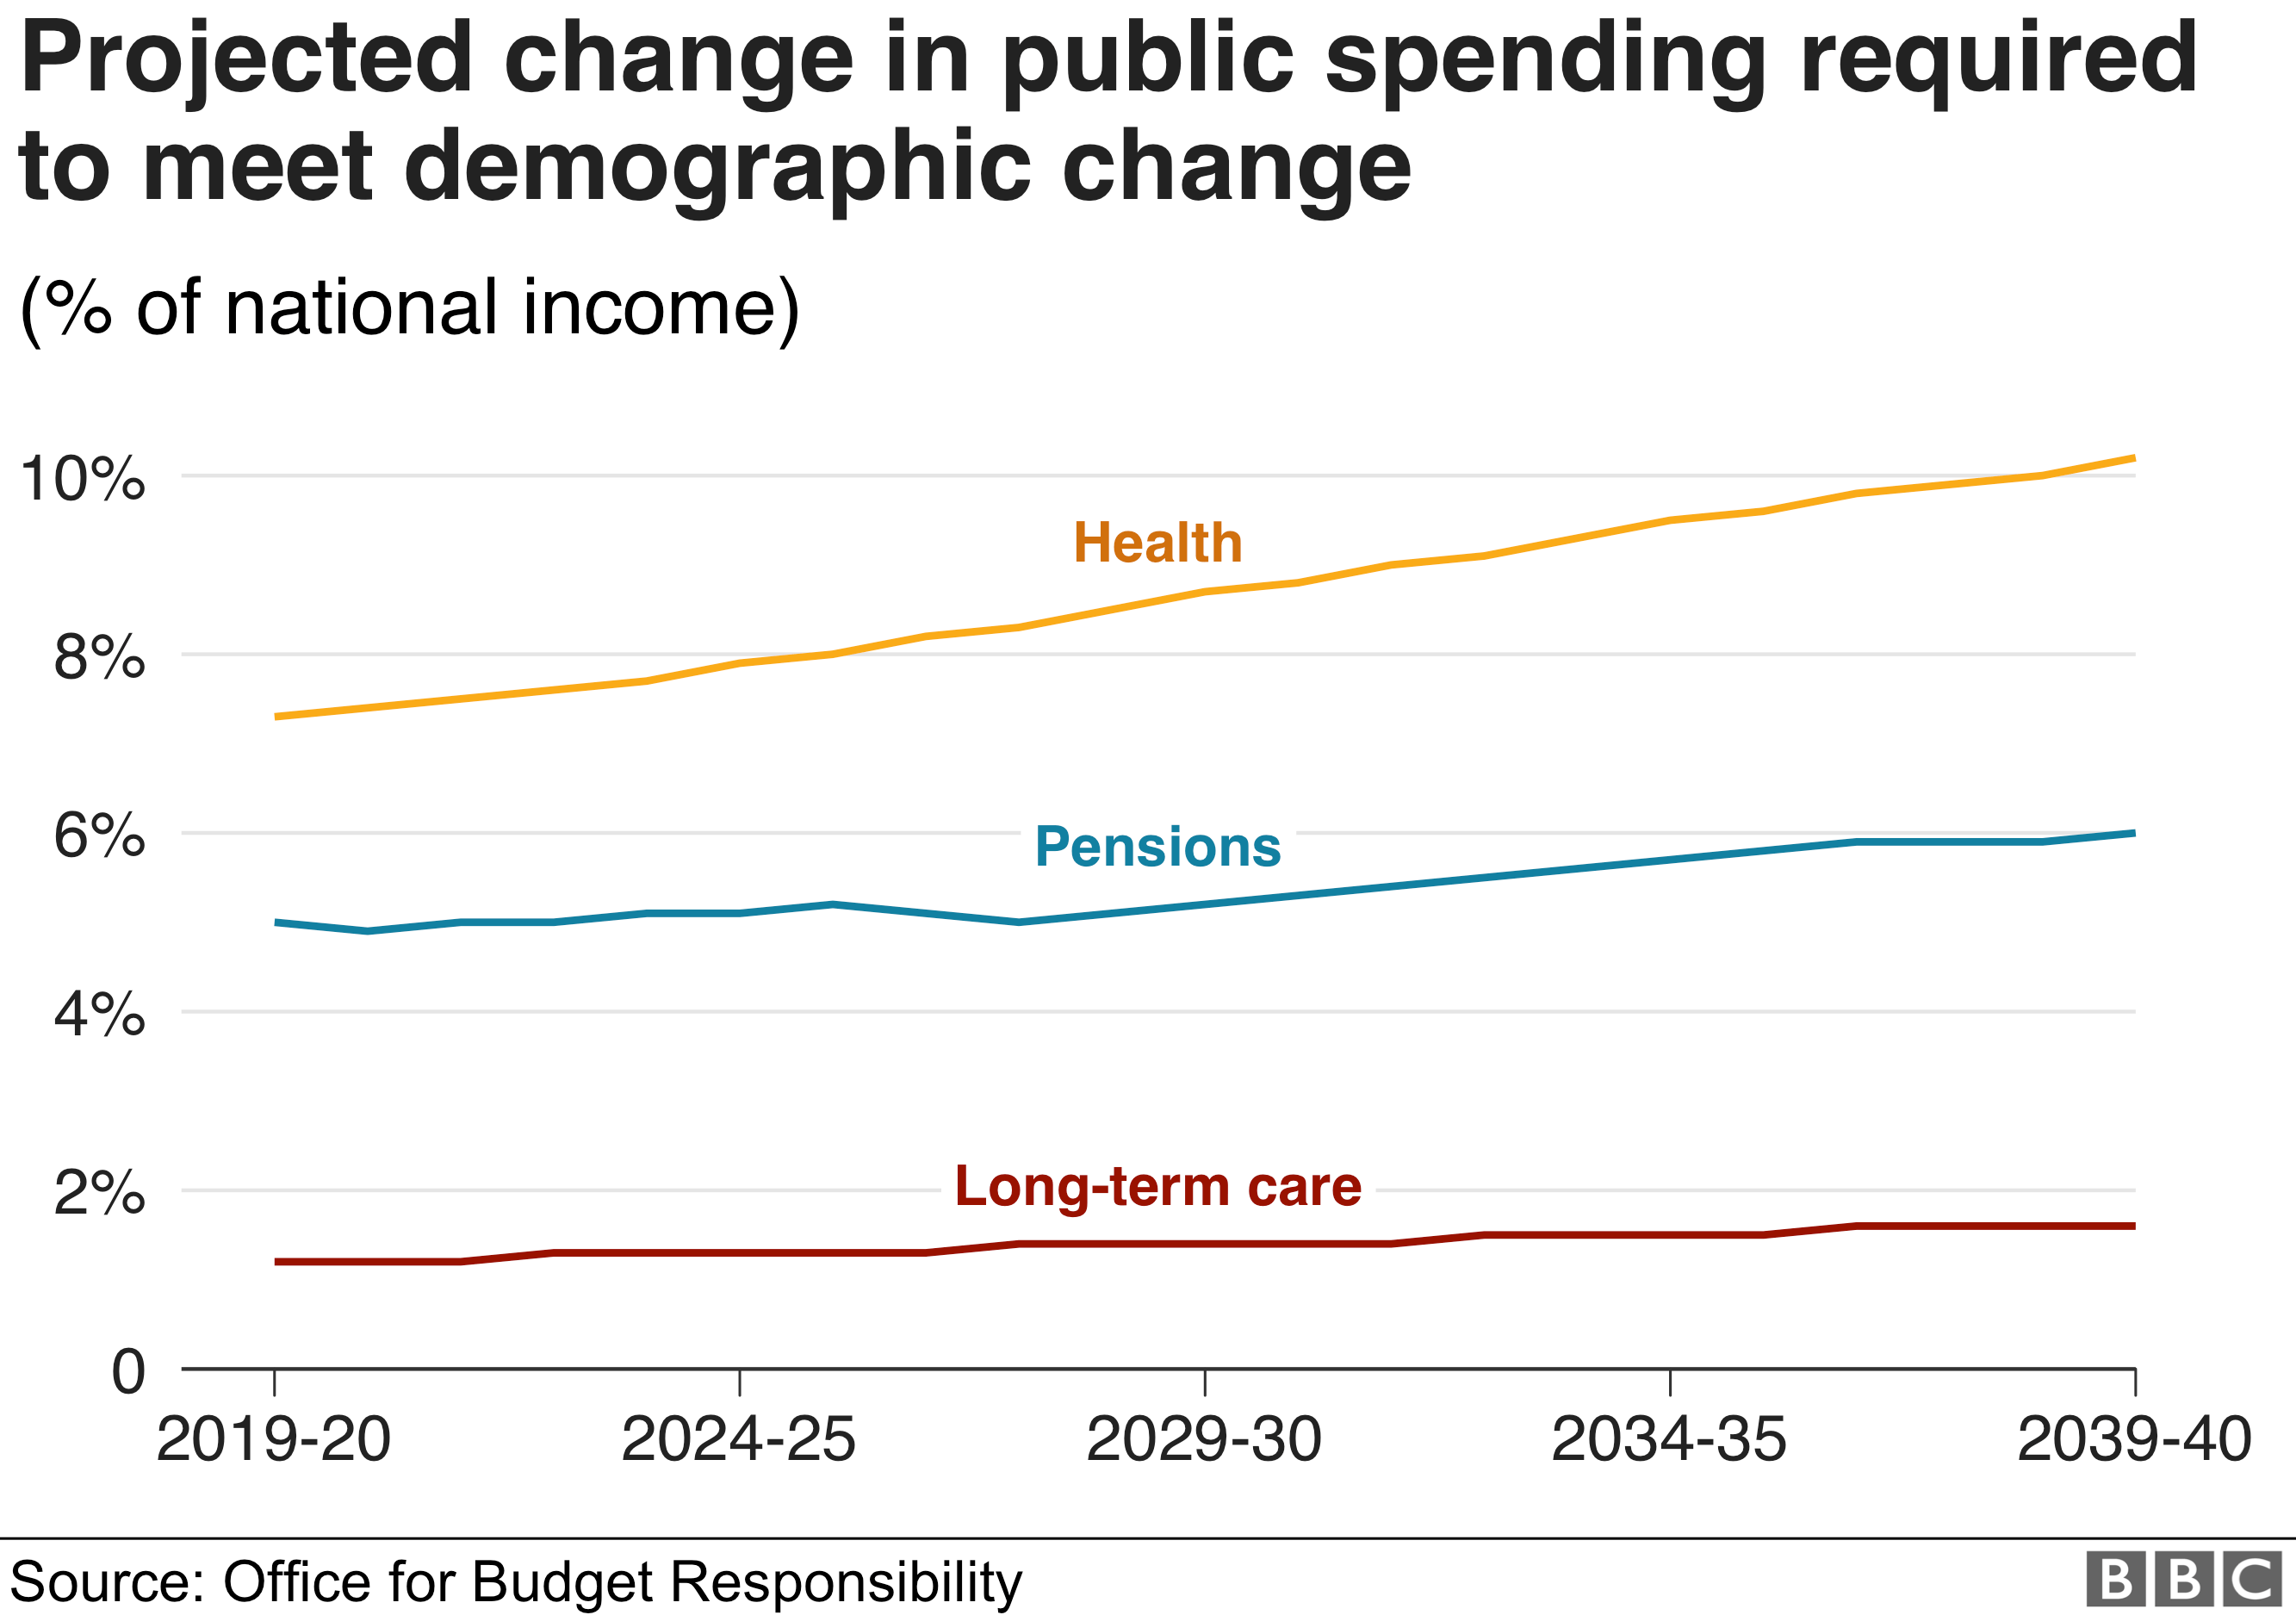 Projected change in public spending required to meet demographic change (as a percentage of national income). Shows steady long term rises in the amounts needed for health, pensions and long-term care.